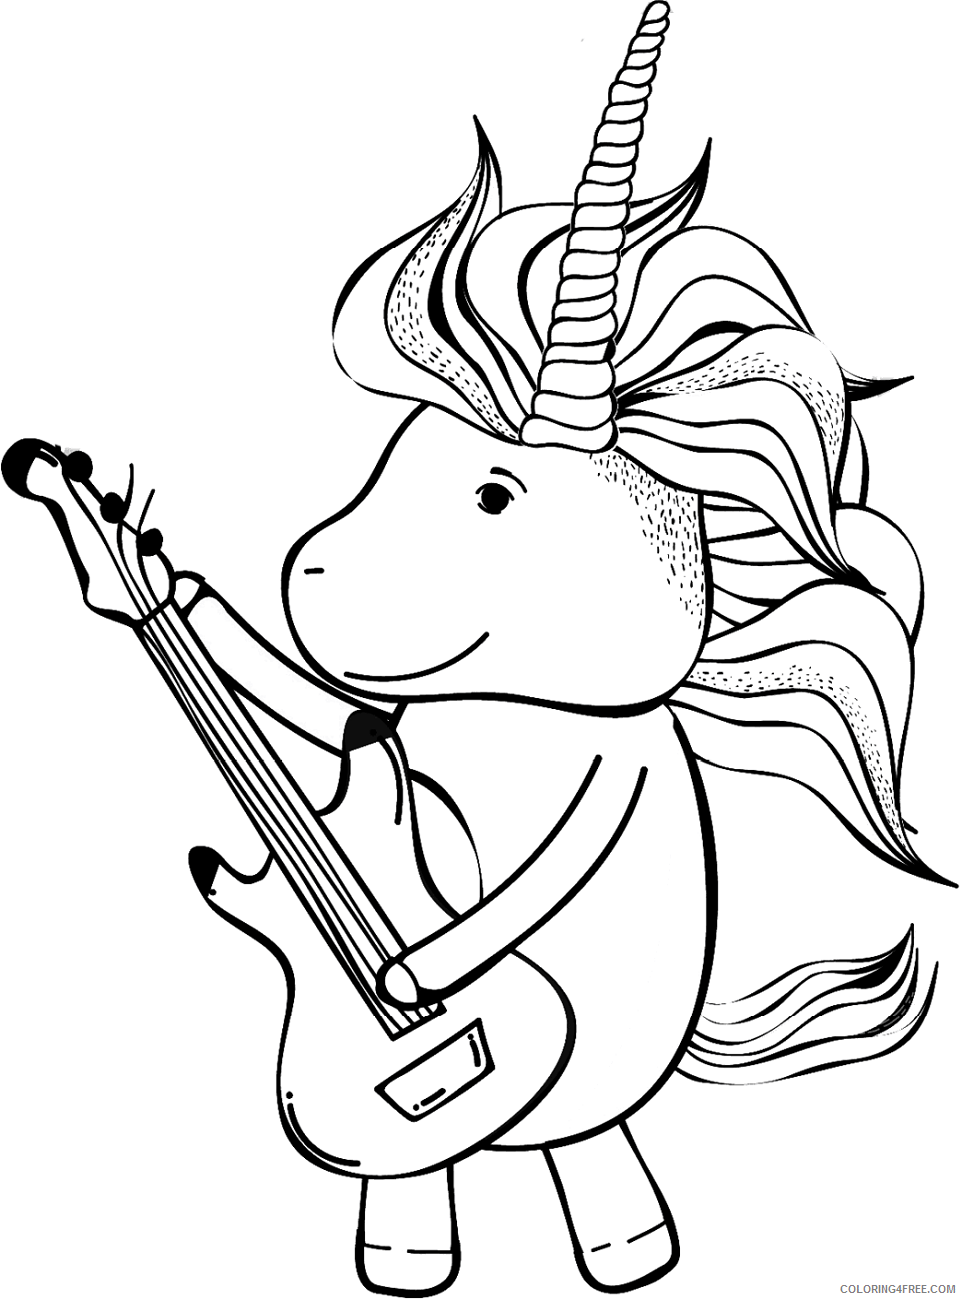 Guitar Coloring Pages unicorn_playing_guitar Printable 2021 3051 Coloring4free